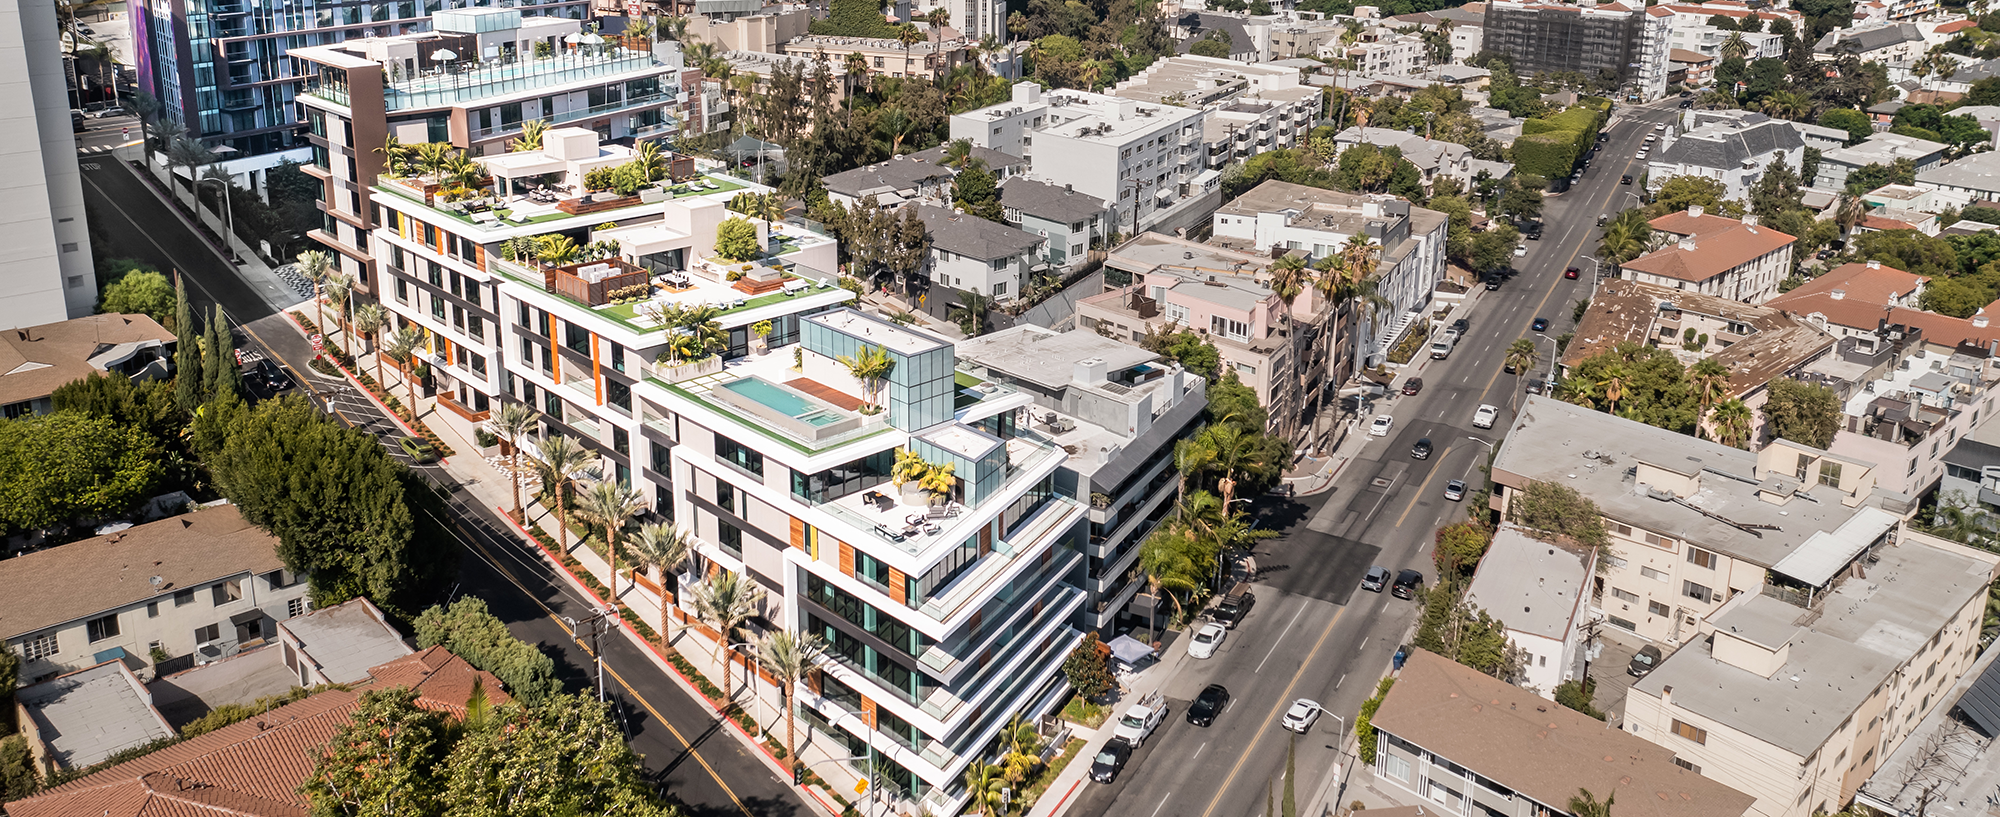 LA Times: West Hollywood penthouse sells for $21.5 million